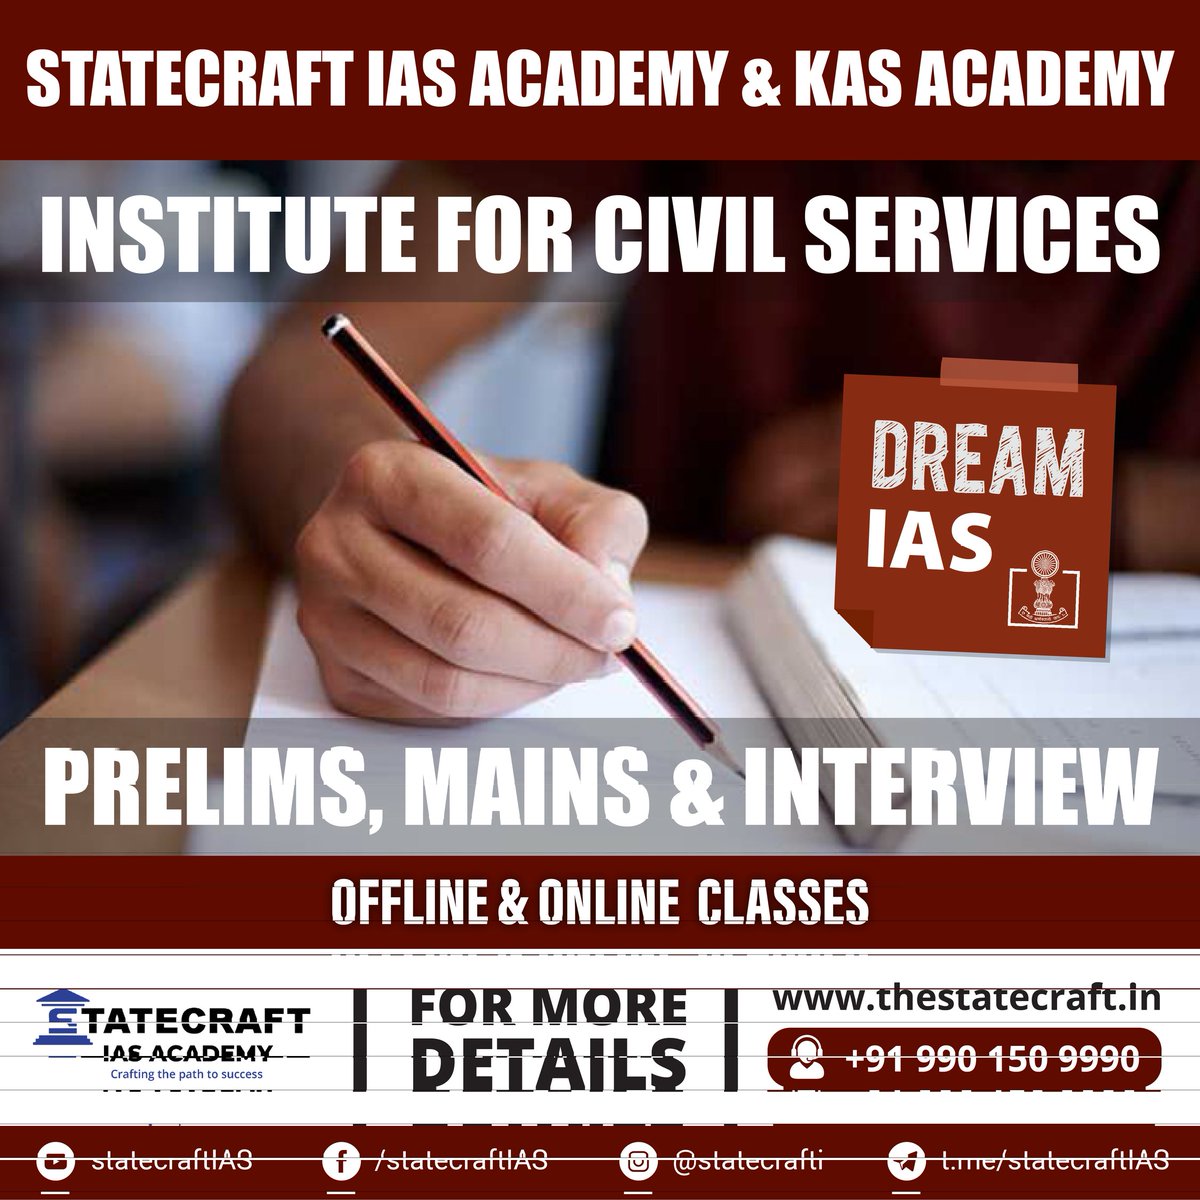 Statecraft IAS & KAS Academy

Institute for  Civil Services

Prelims + Mains + Interview

For more details call us at 9901509990

Or visit thestatecraft.in

#IAS #Prelims #UPSC #civilservices #iasaspirant #StatecraftIAS